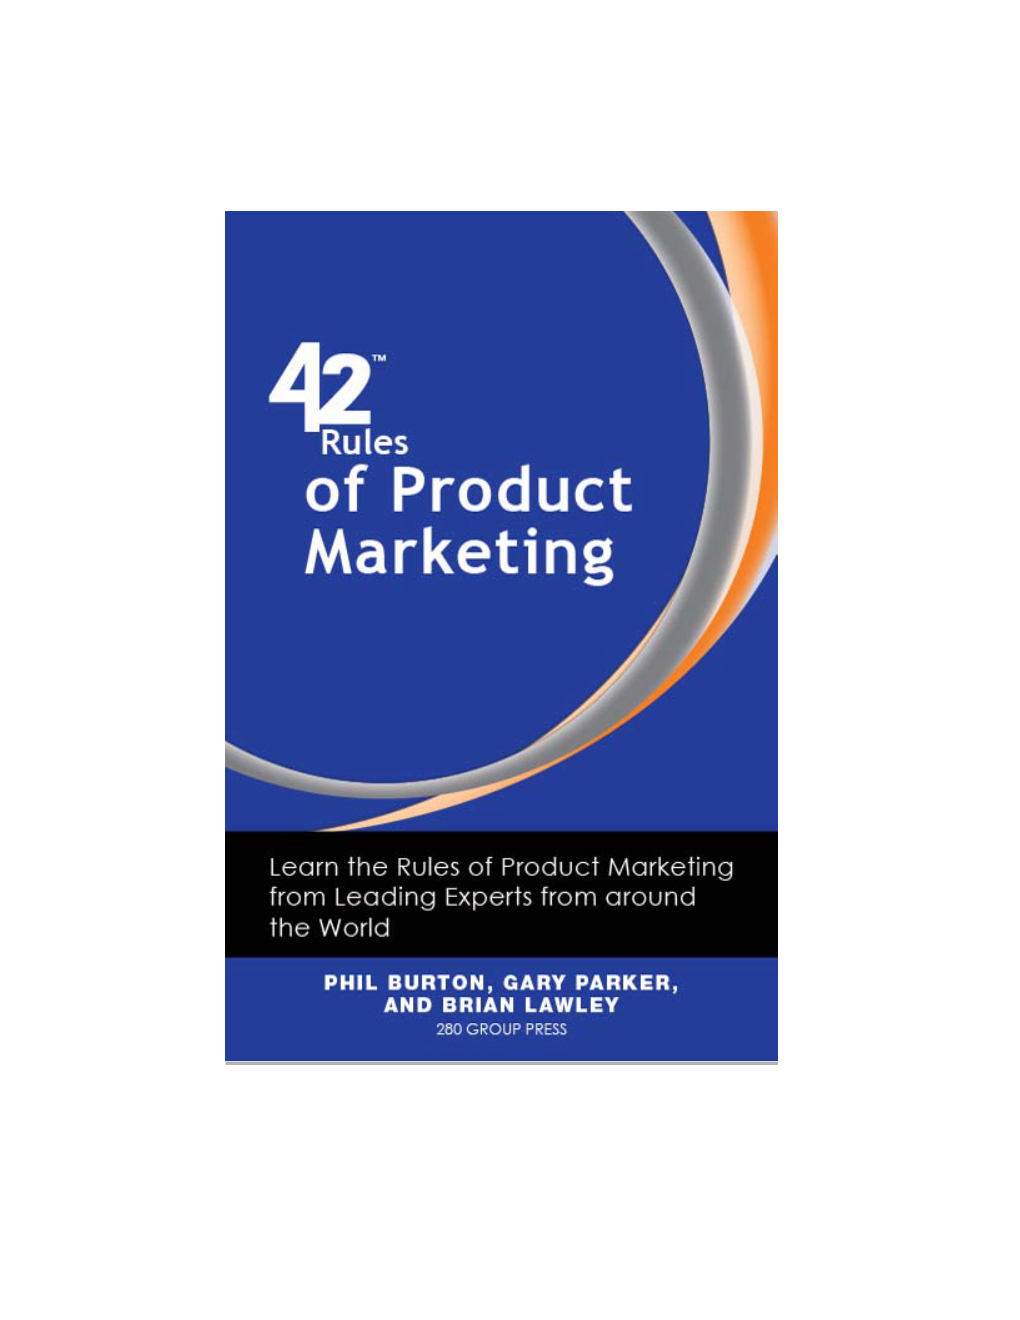 42 Rules of Product Marketing” Book Excerpt Learn the Rules of Product Marketing from Leading Experts from Around the World